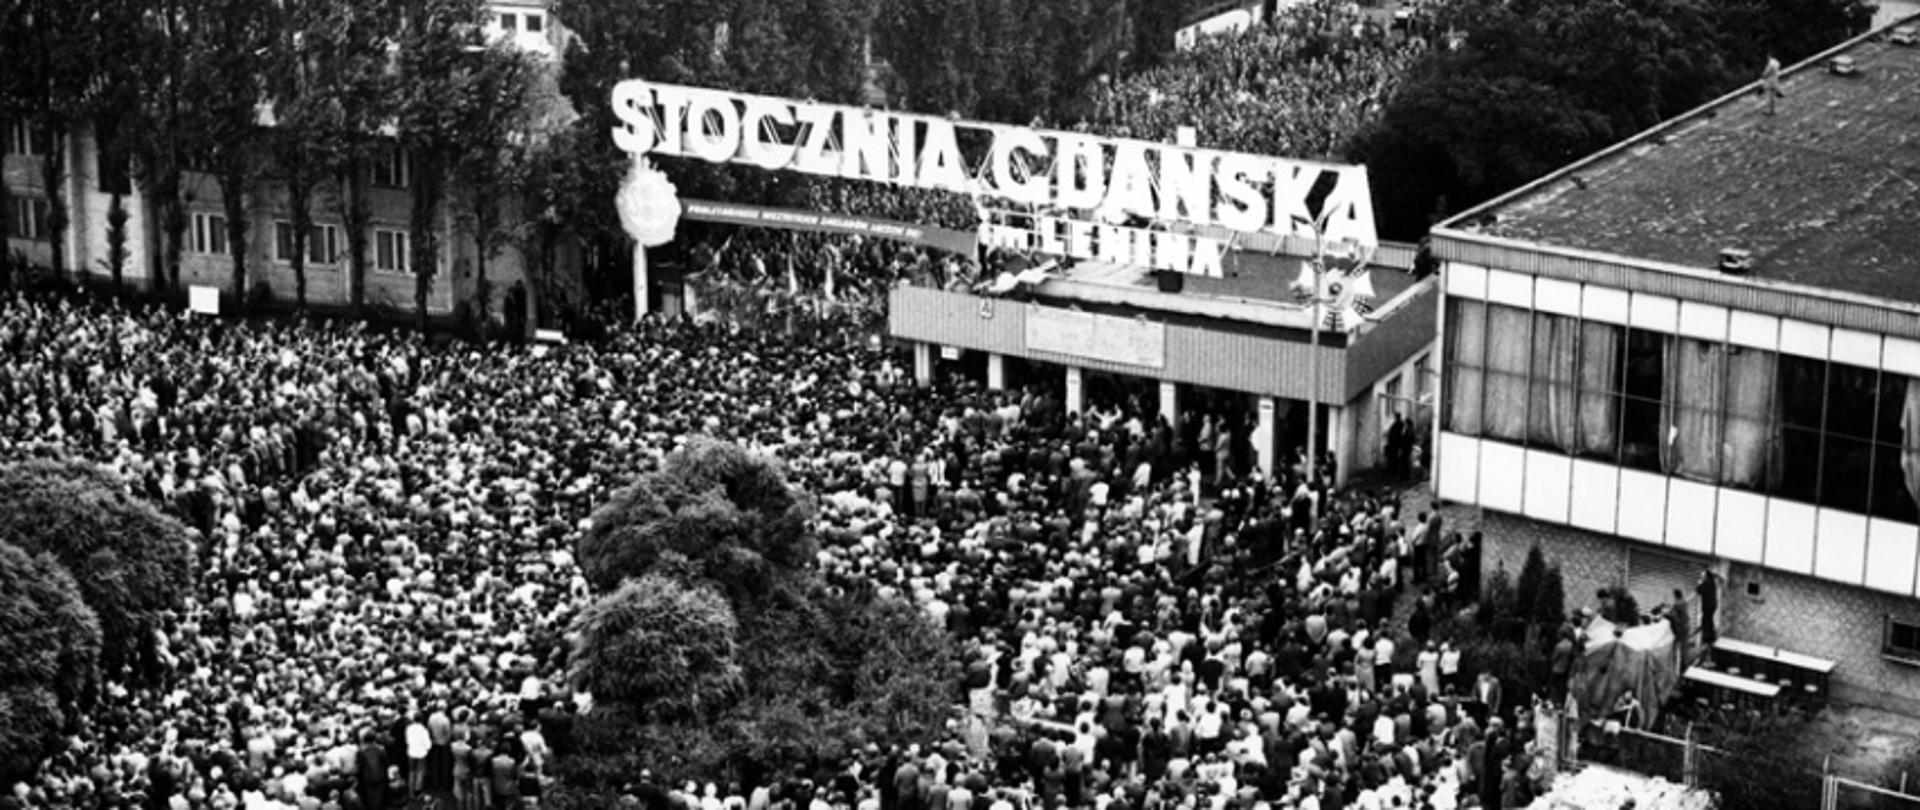 August strike at Lenin's Shipyard in Gdansk. Top view of Gate No. 2 and the citizens and shipyard workers gathered below it. Above the gate, there is a banner with the slogan "PROLETARIANS OF ALL FACTORIES UNITE!", and on the roof of the guardhouse there are boards with 21 demands of MKS.